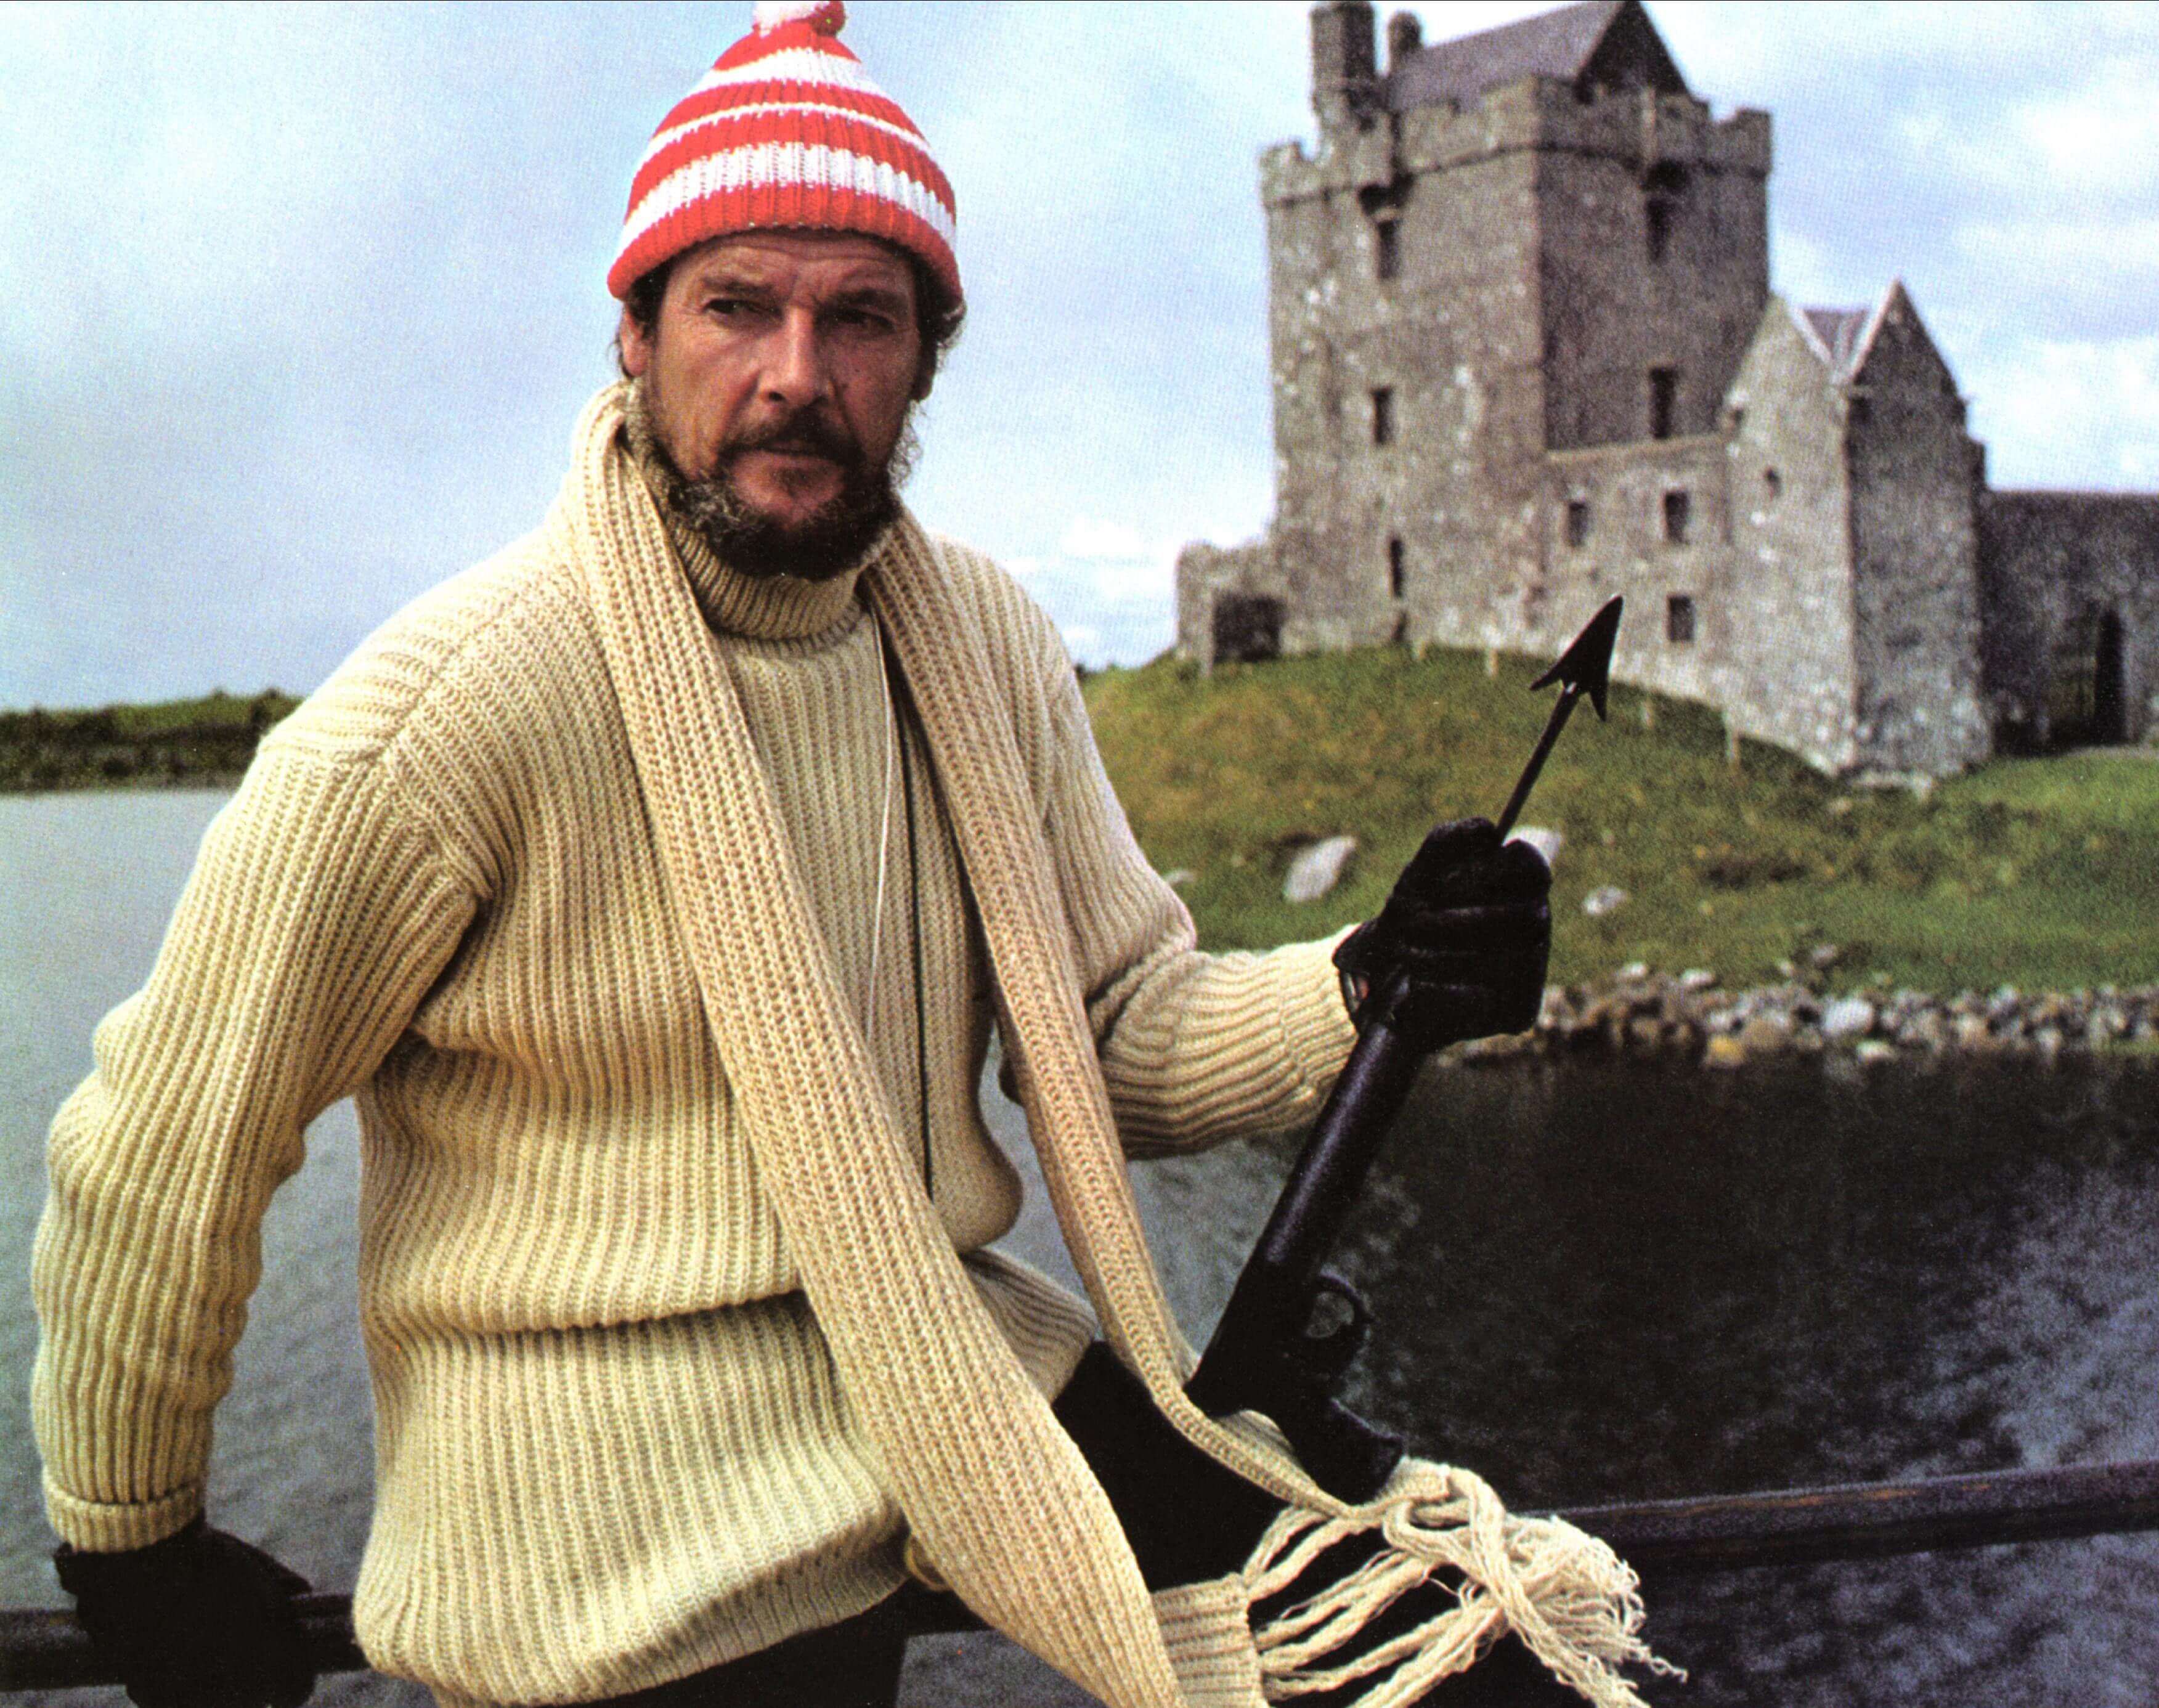 Roger as Ffolkes in North Sea Hijack (1980). AJ Pics / Alamy Stock Photo.